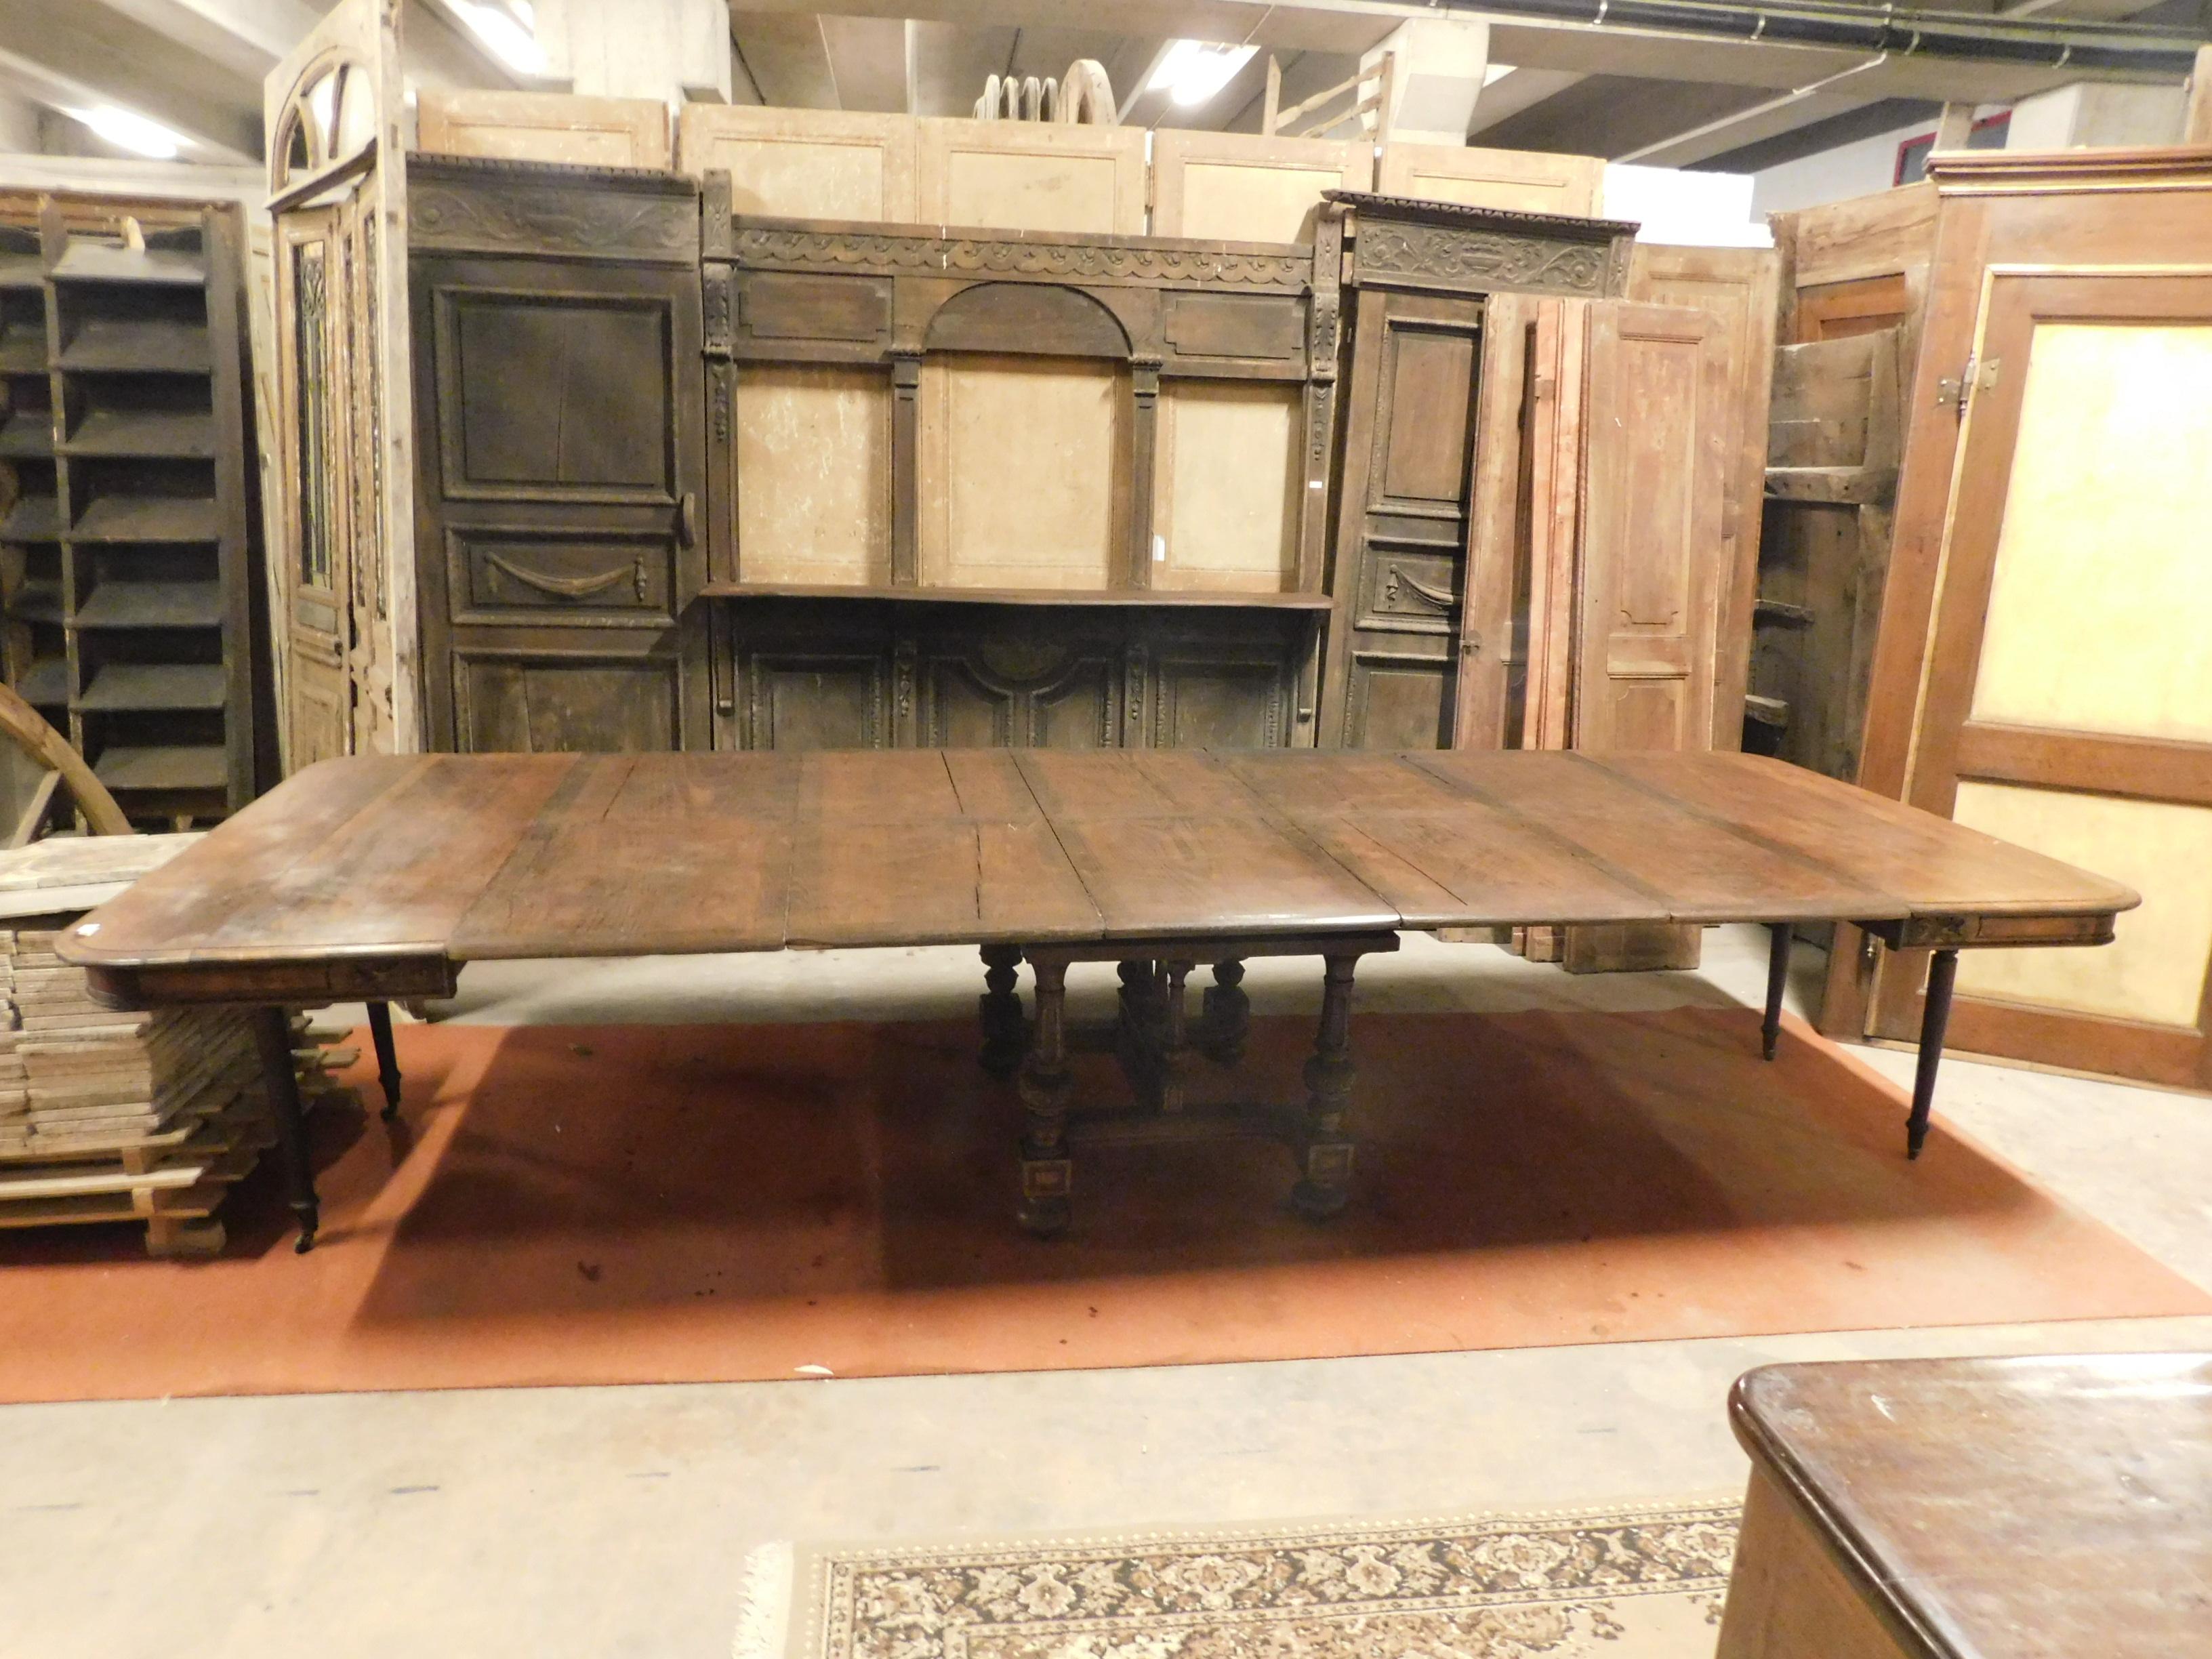 20th century antique extendable table with small wheels, flowered friezes and intermediate planks. Maximum size 368 cm.